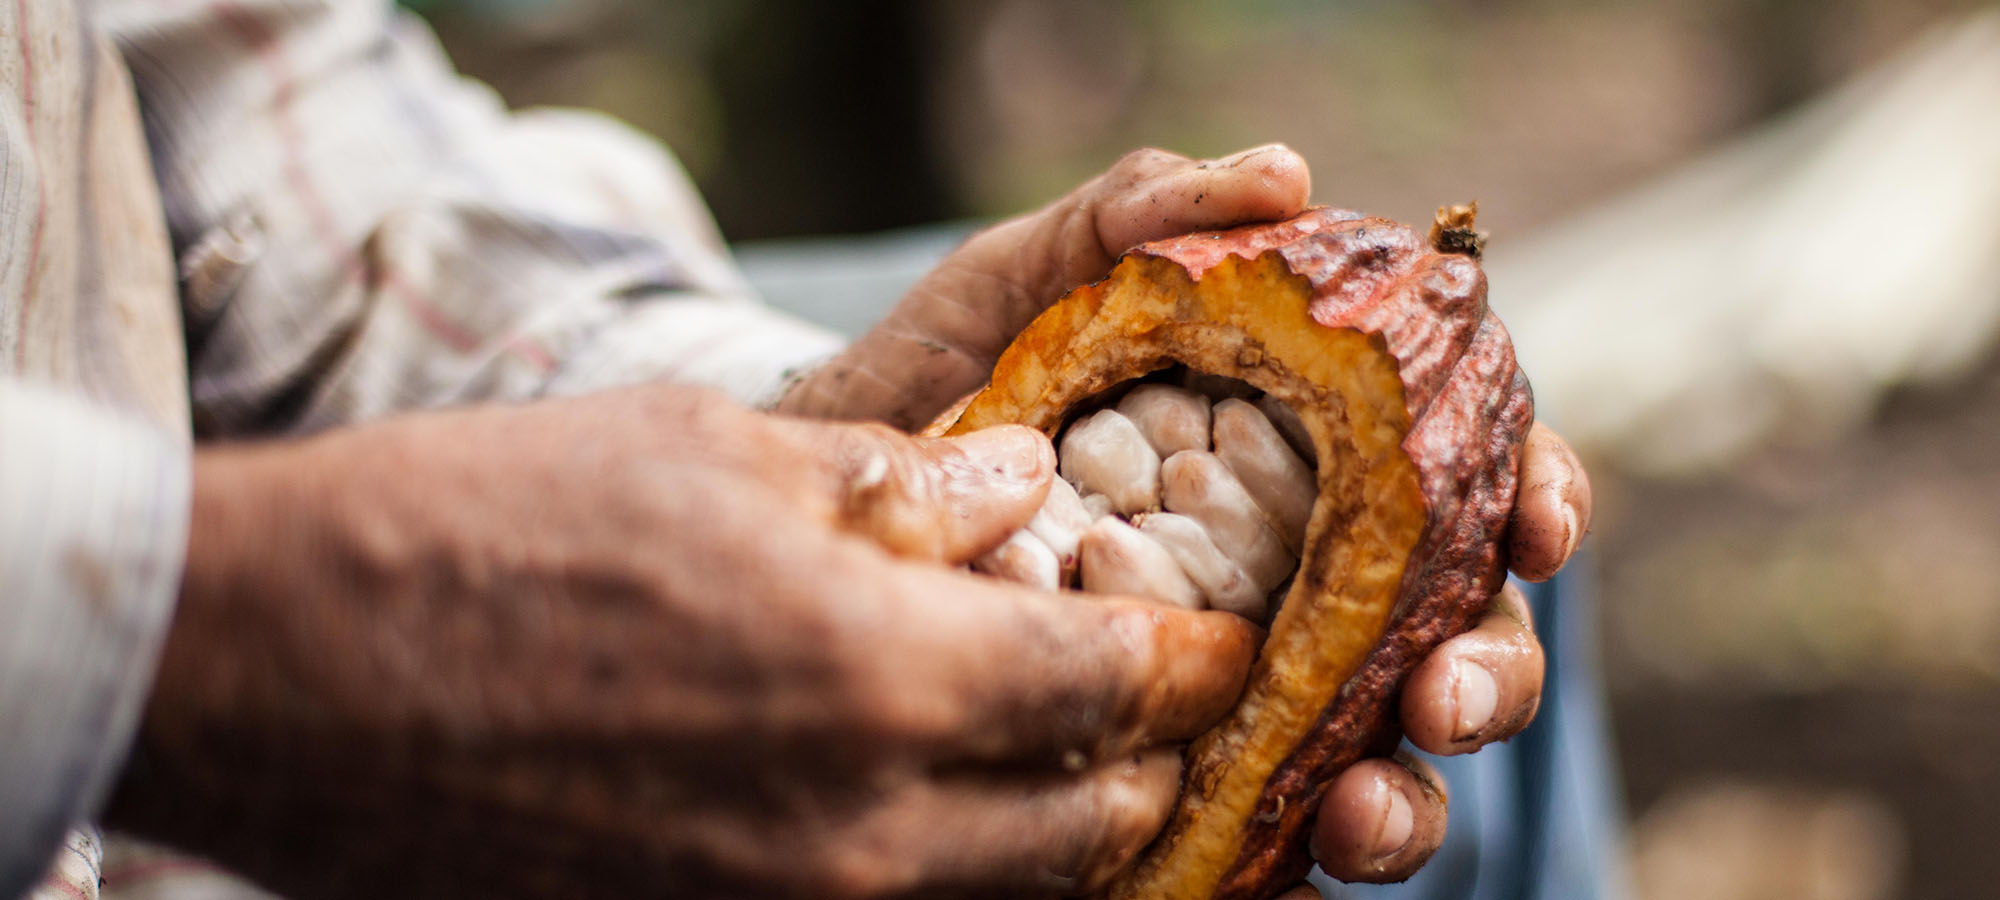 hand opening cacao pod